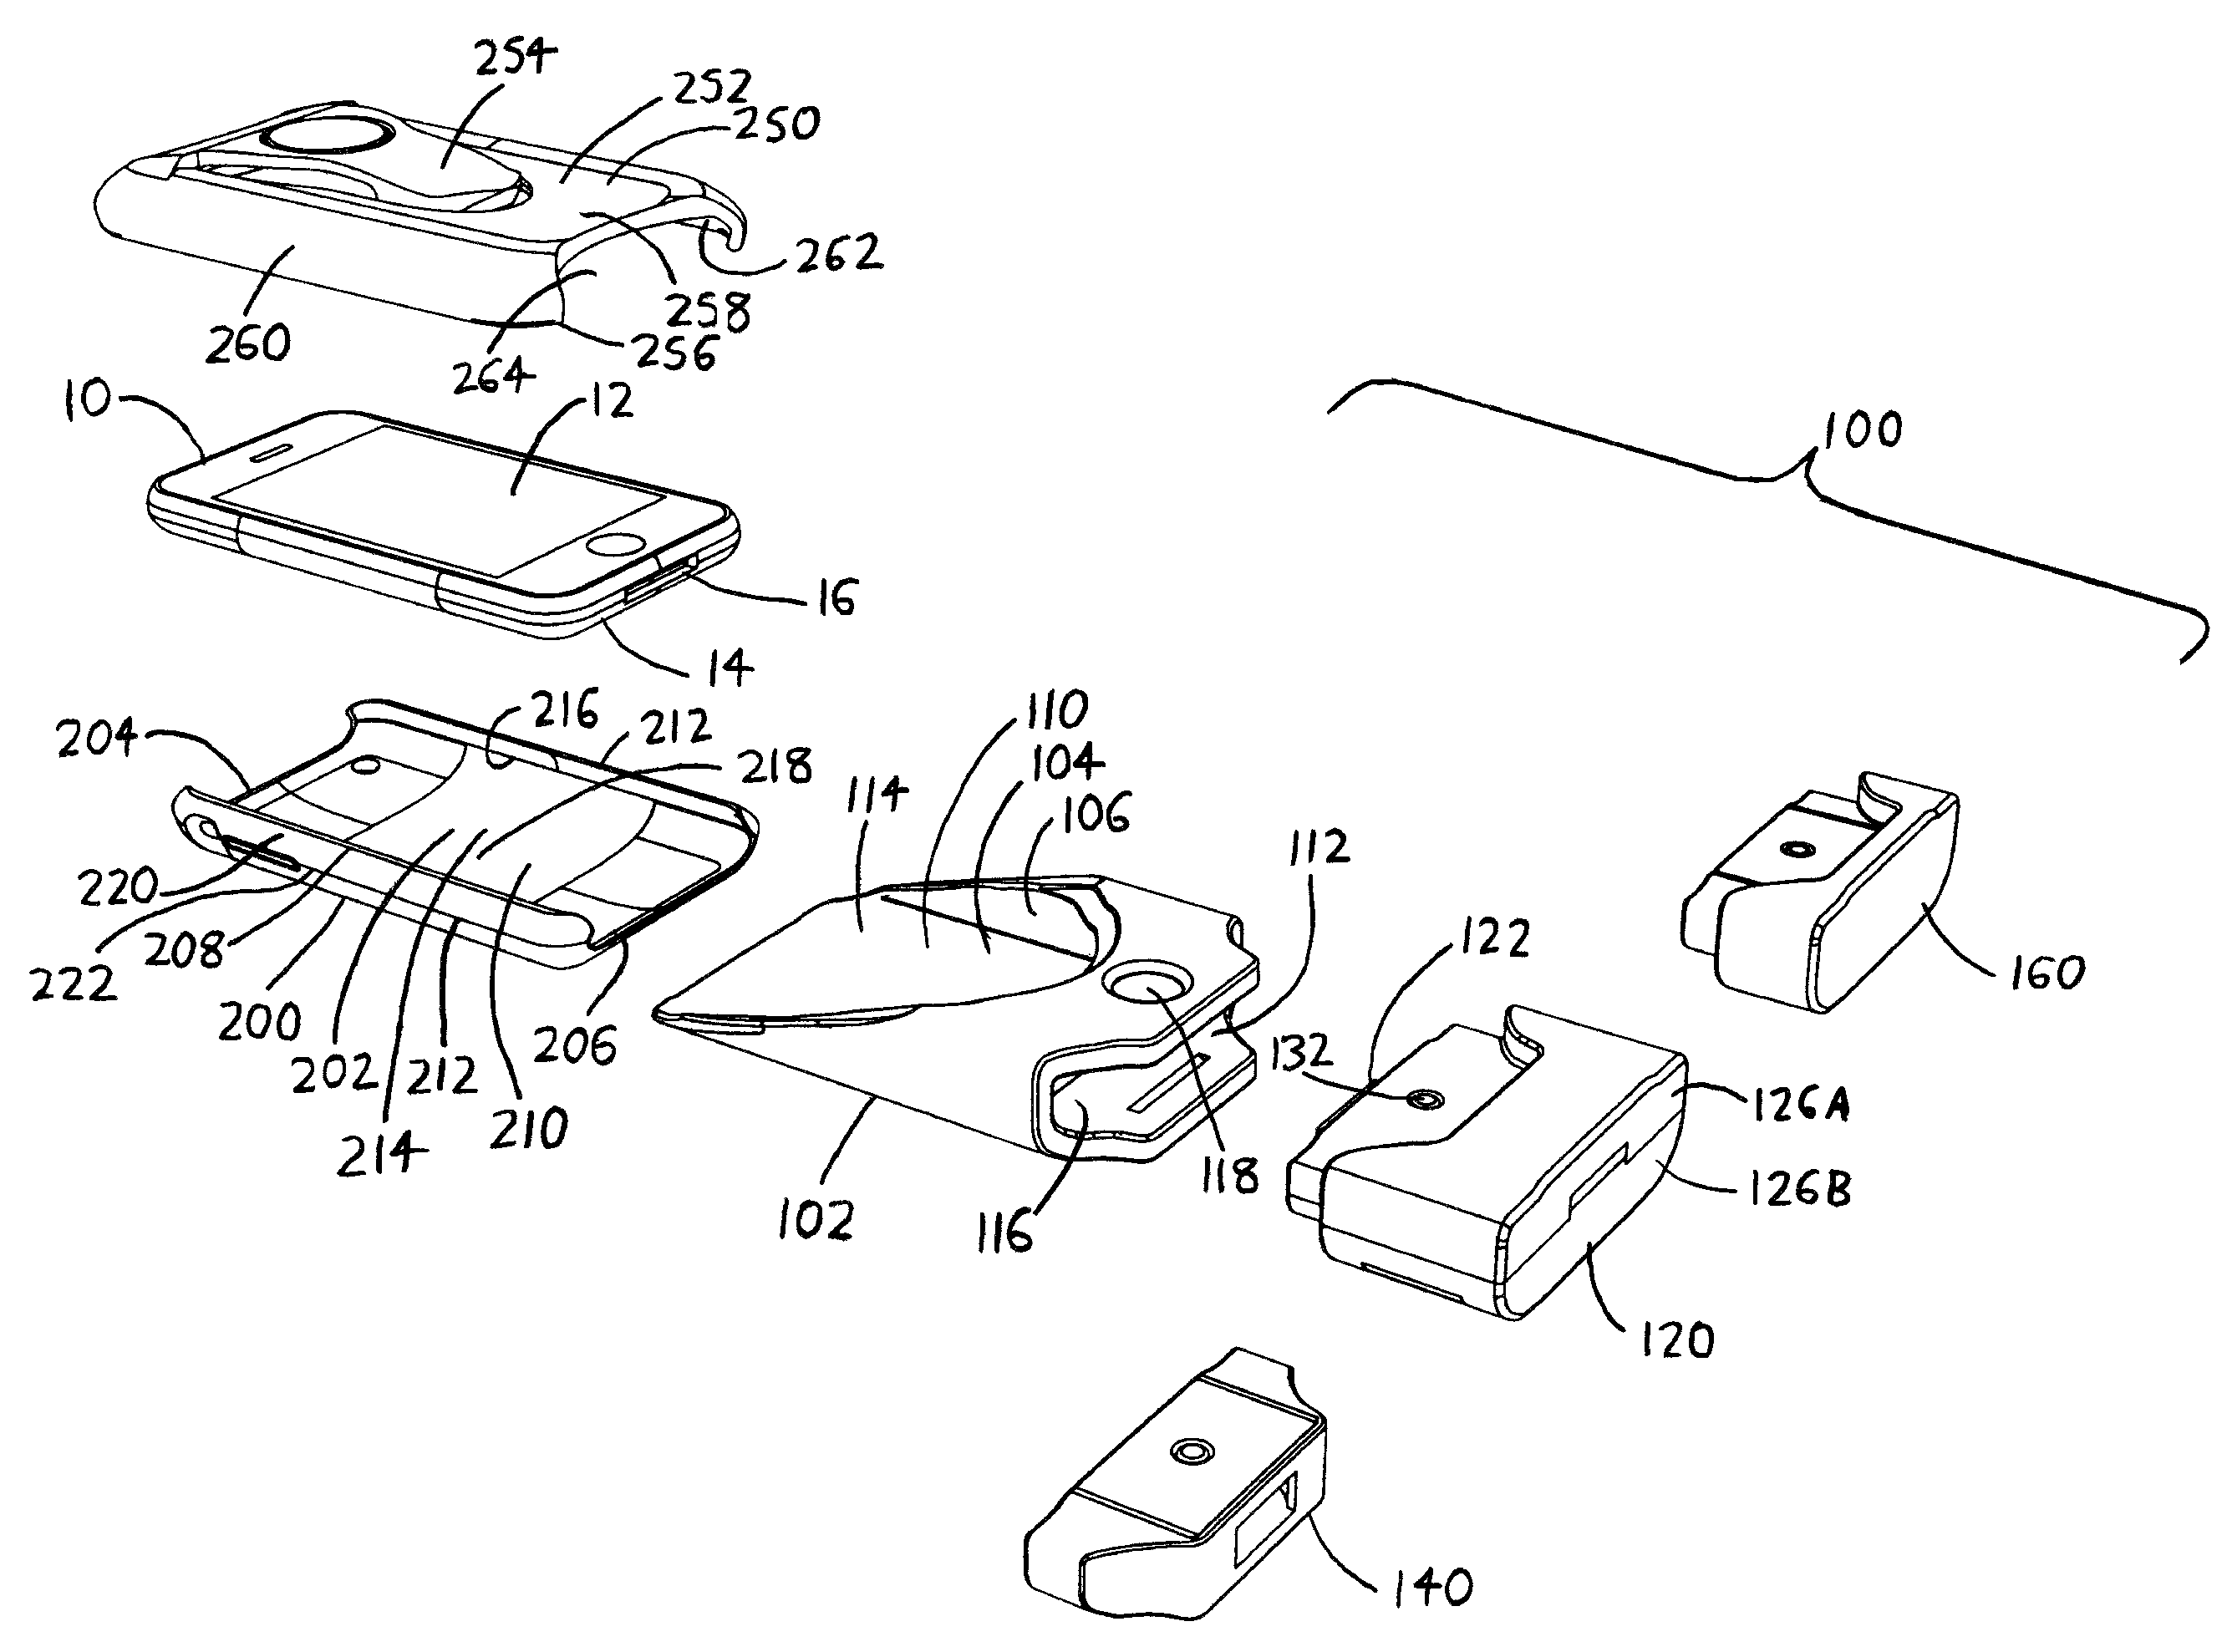 Docking system for MP3 players and other portable electronic devices